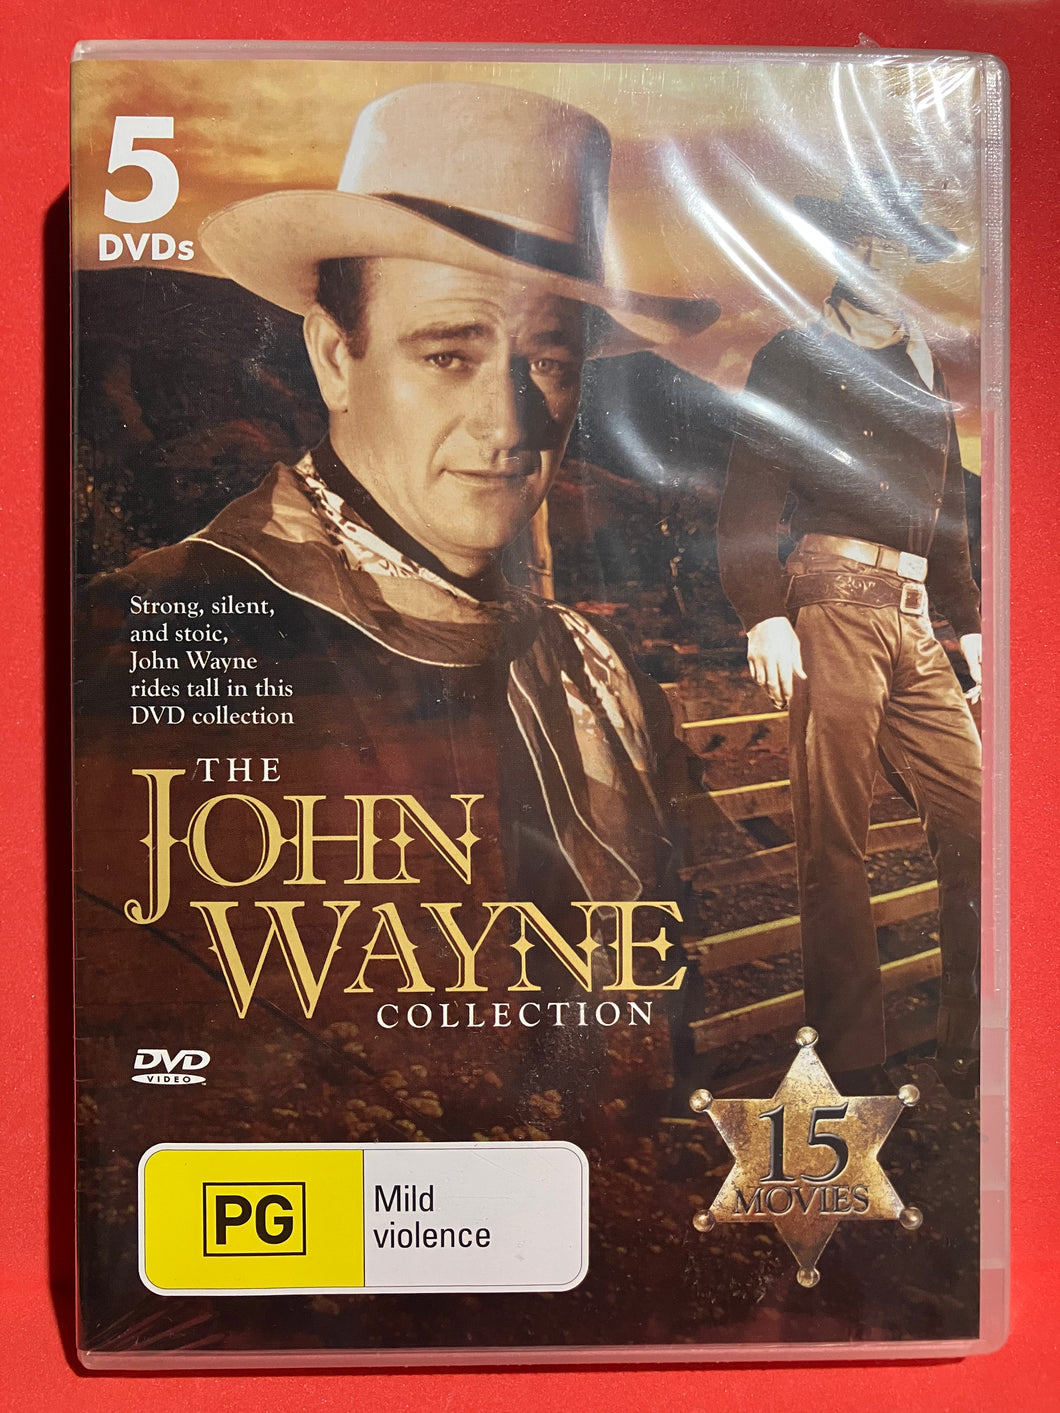 JOHN WAYNE COLLECTION - 15 MOVIES - 5 DVDS (SEALED)